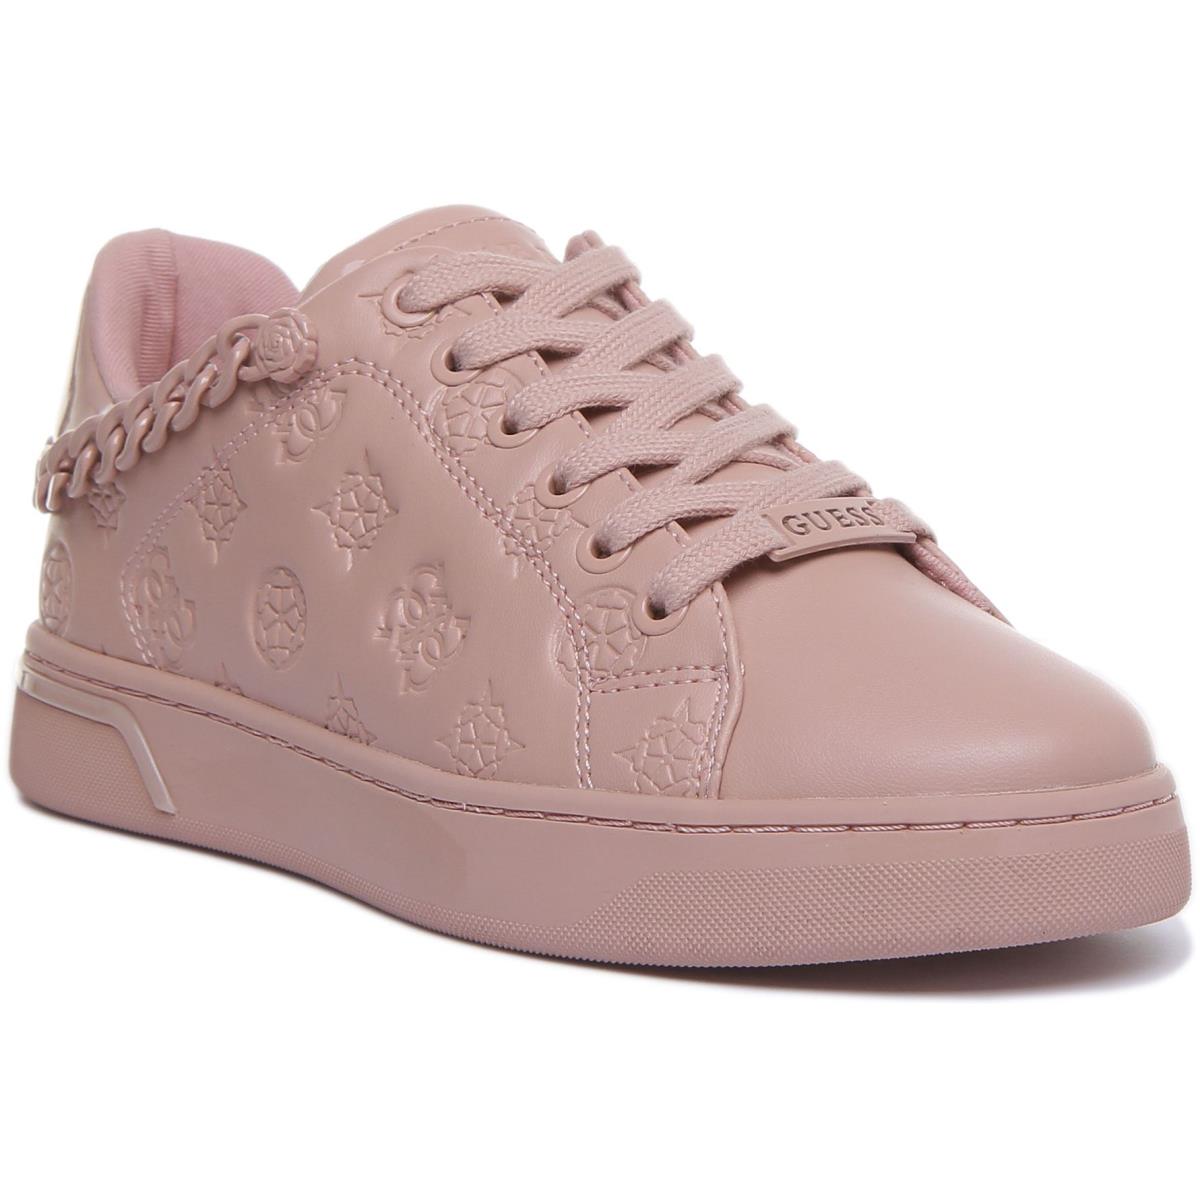 Guess Fl5Riyfal12 In Rose Riyan Active Lady Lace Up Trainer Size US 5 - 11 ROSE